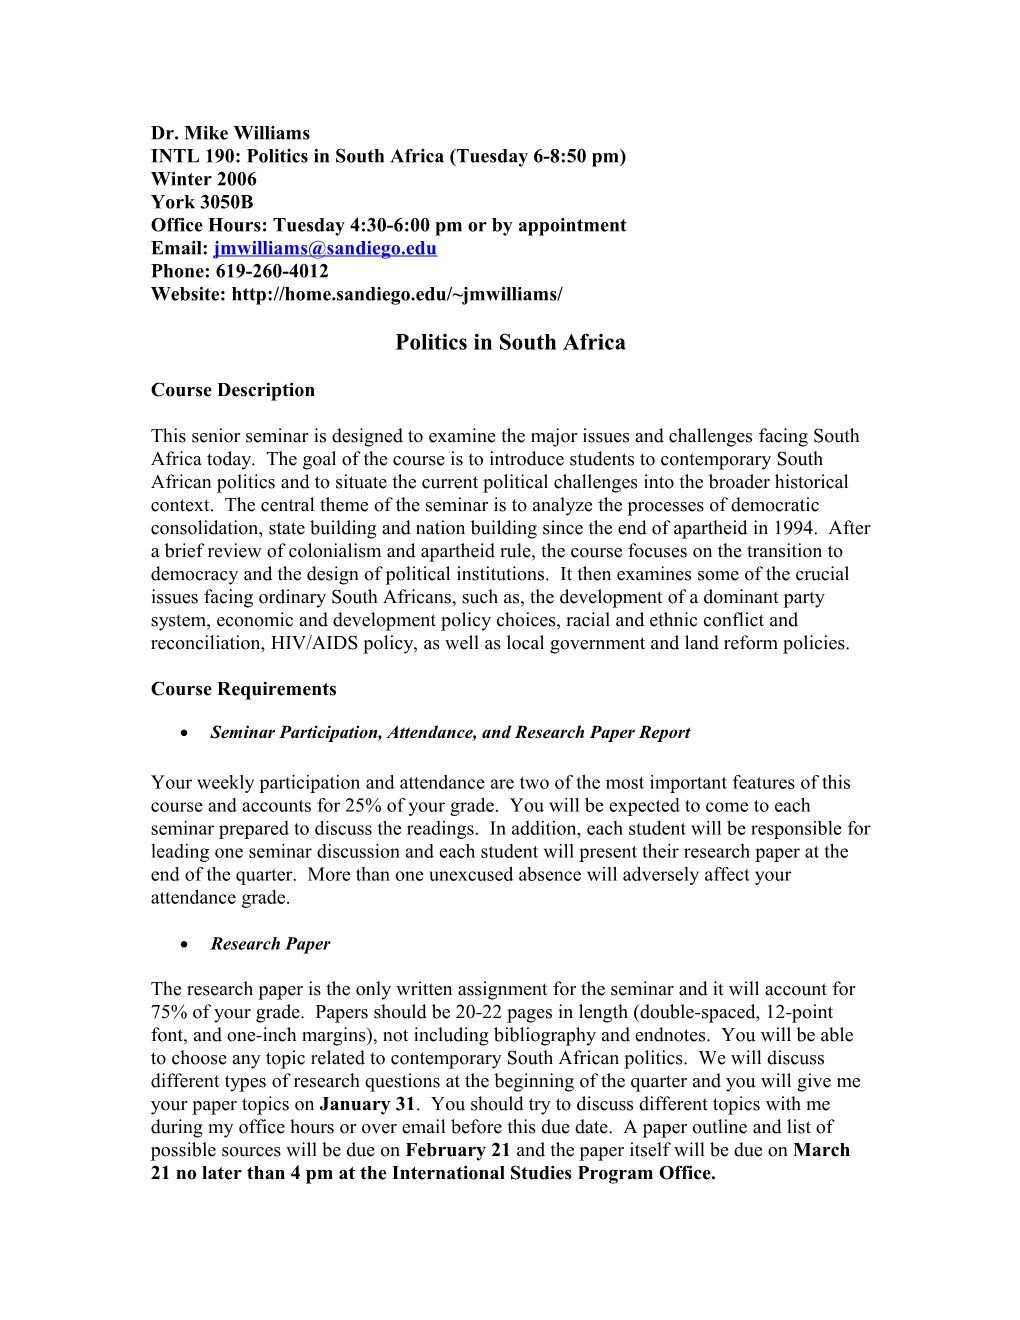 INTL 190: Politics in South Africa (Tuesday 6-8:50 Pm)